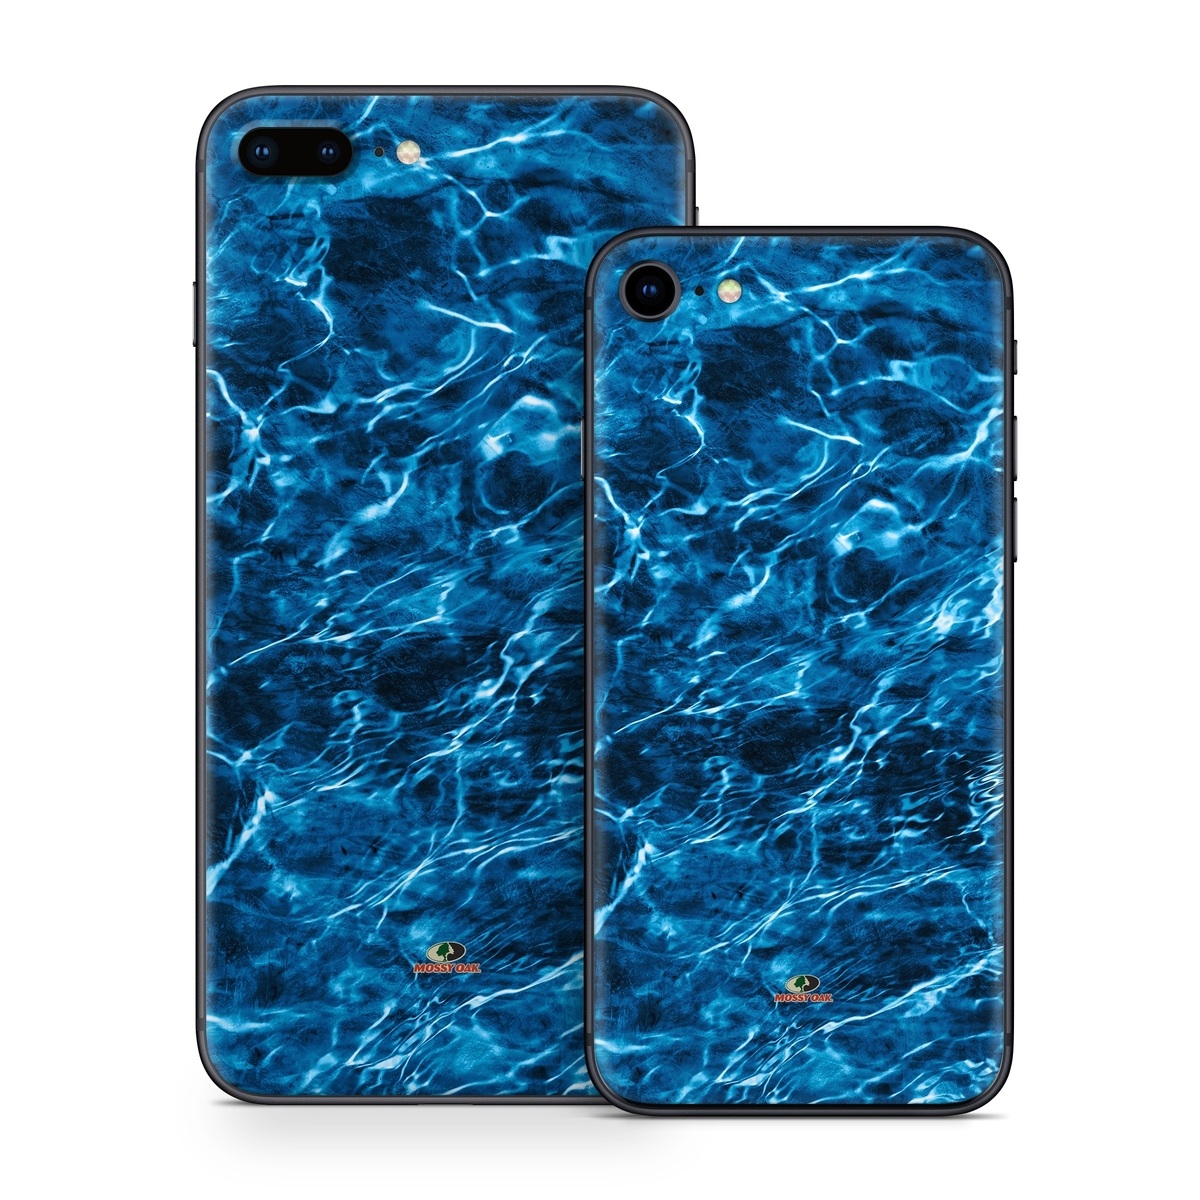 iPhone 8 Series Skin design of Blue, Water, Aqua, Turquoise, Azure, Electric blue, Sky, Pattern, Sea, Ocean, with blue, black colors